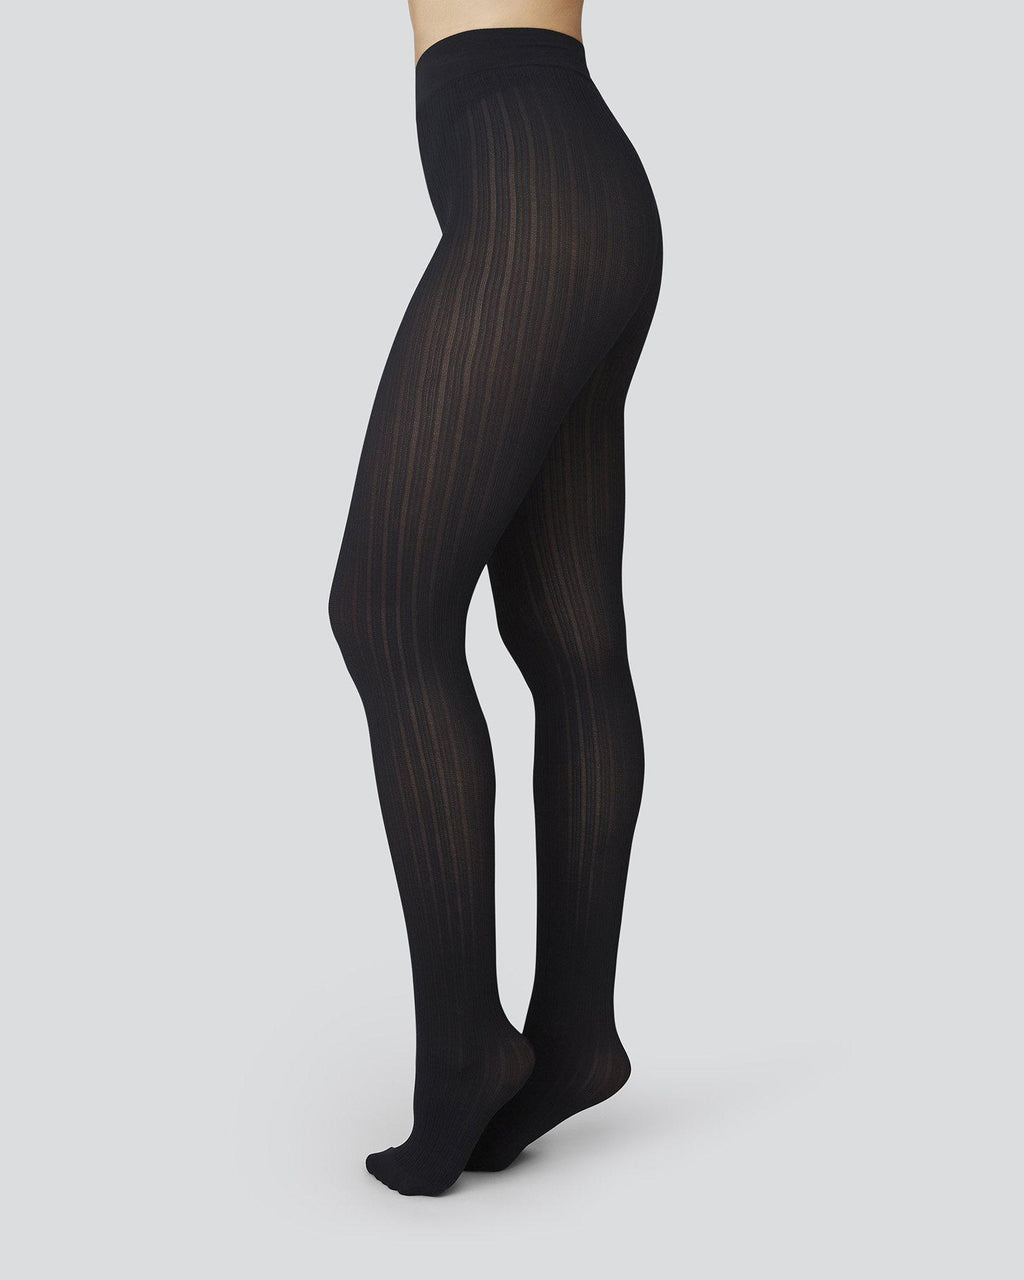 Aristoc on X: Our Rib Opaque Tights in Black are designed for comfort and  fit, with just an elegant twist of style. Check out our Rib Opaque Tights  in Black in the